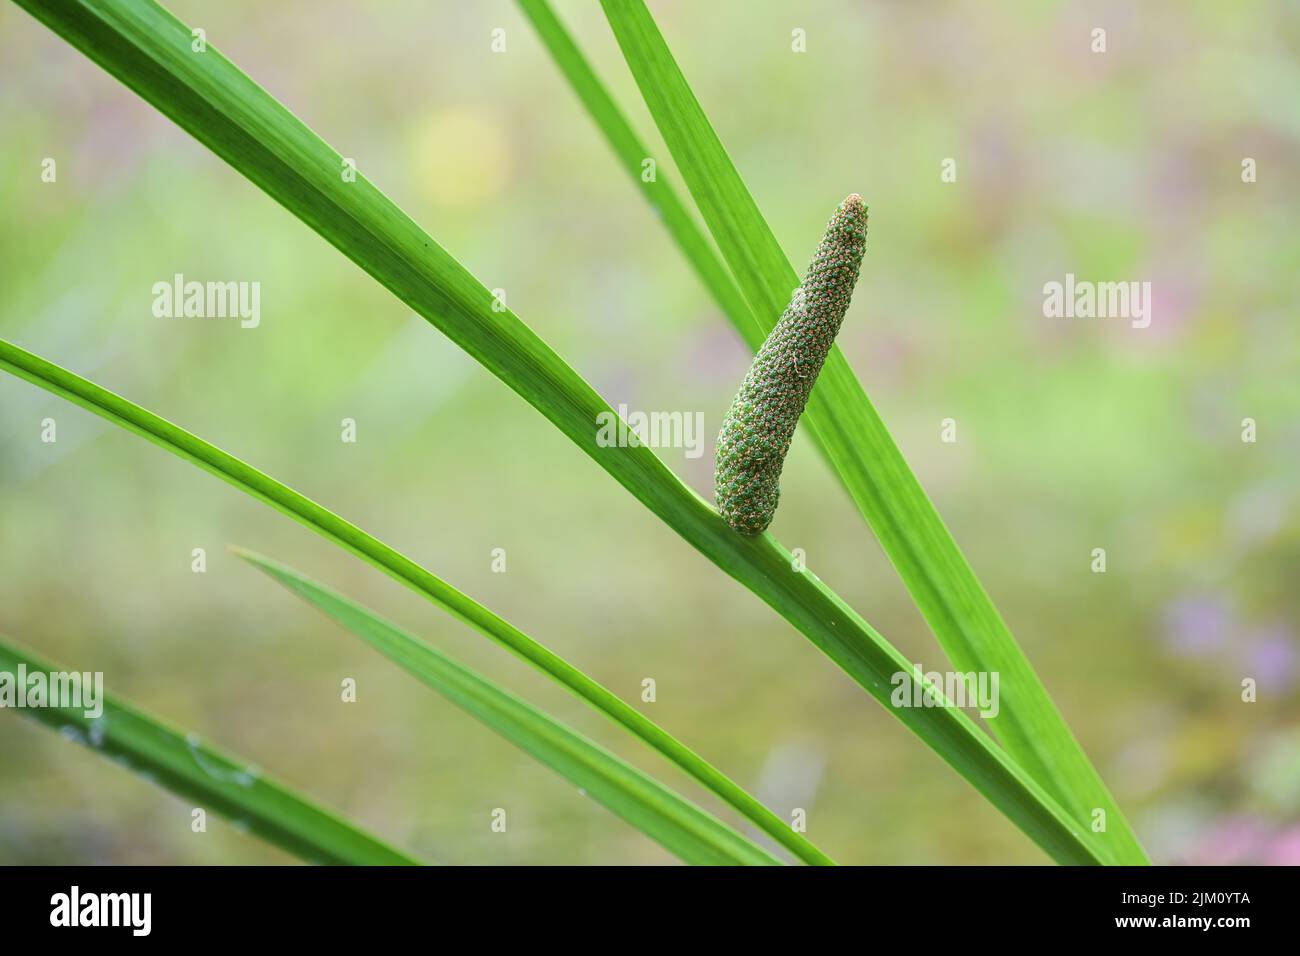 Inflorescence of sweet flag (Acorus calamus), tall wetland plant, used as decorative pond vegetation and also in traditional medicine, blurry green ba Stock Photo